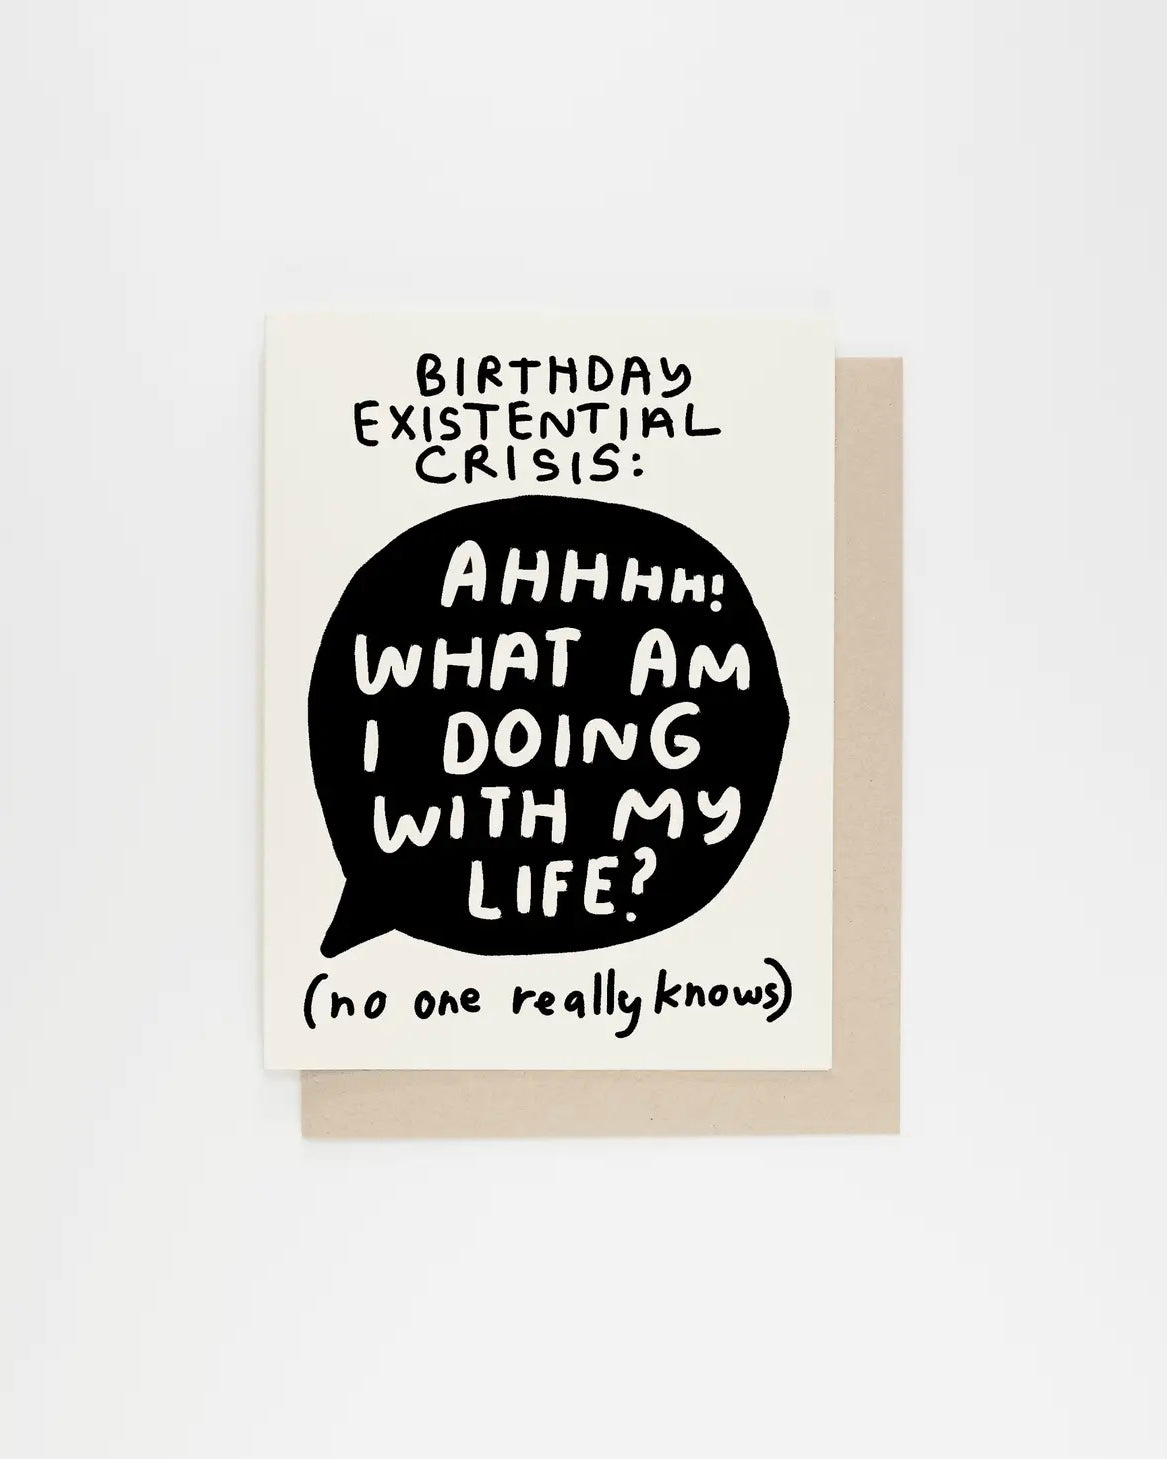 People I've Loved Birthday Crisis Card